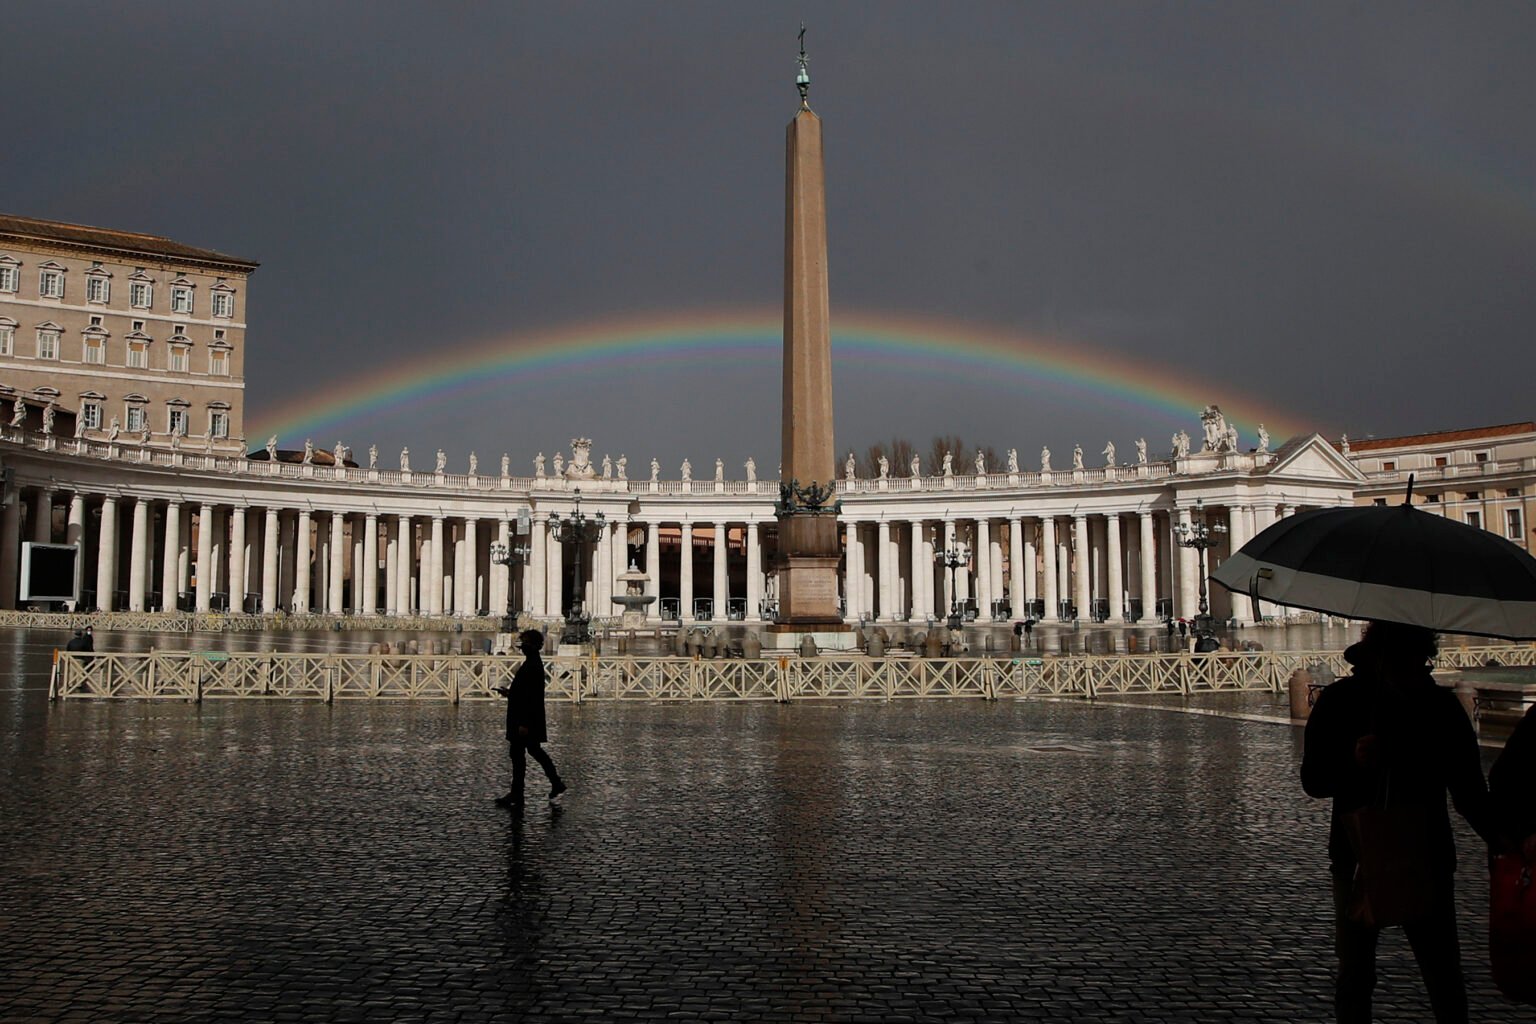 A rainbow shines over St. Peter’s Square at the Vatican, on Jan. 31, 2021. (AP Photo/Alessandra Tarantino, File)